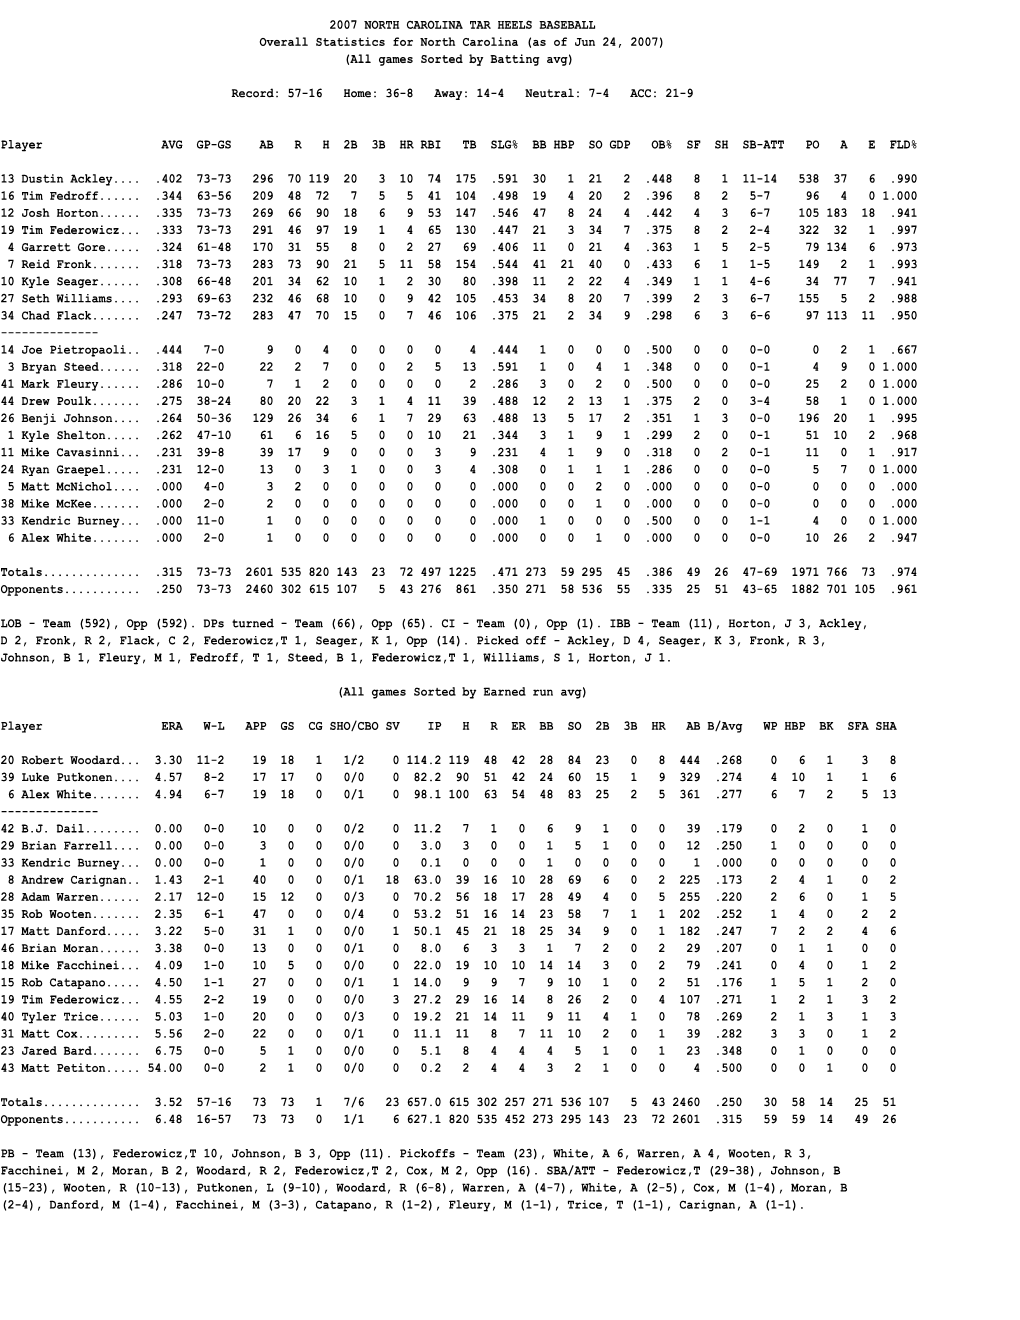 Overall Statistics for North Carolina (As of Jun 24, 2007) (All Games Sorted by Batting Avg)